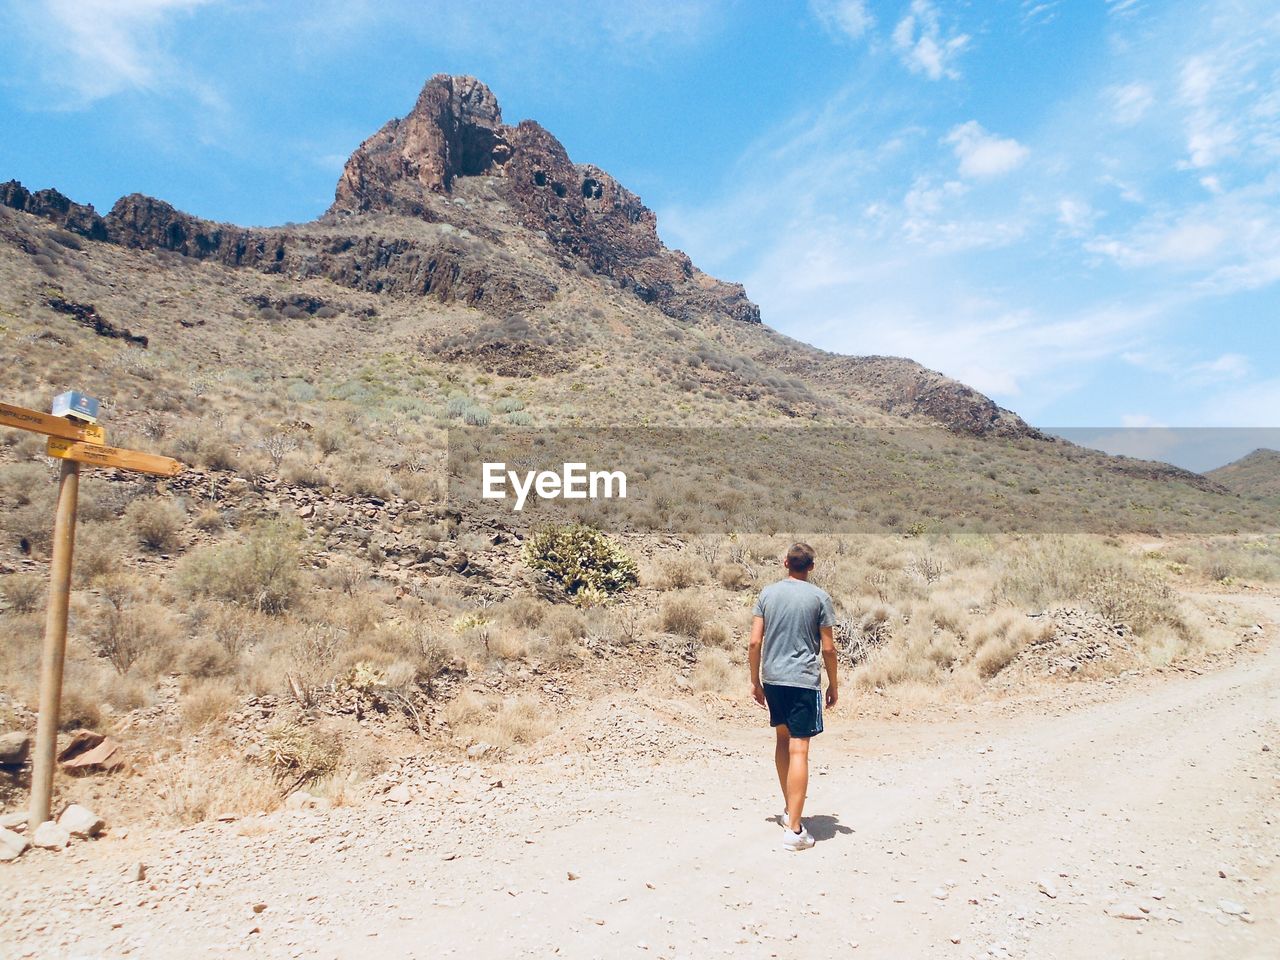 Rear view of man walking on dirt road against mountains